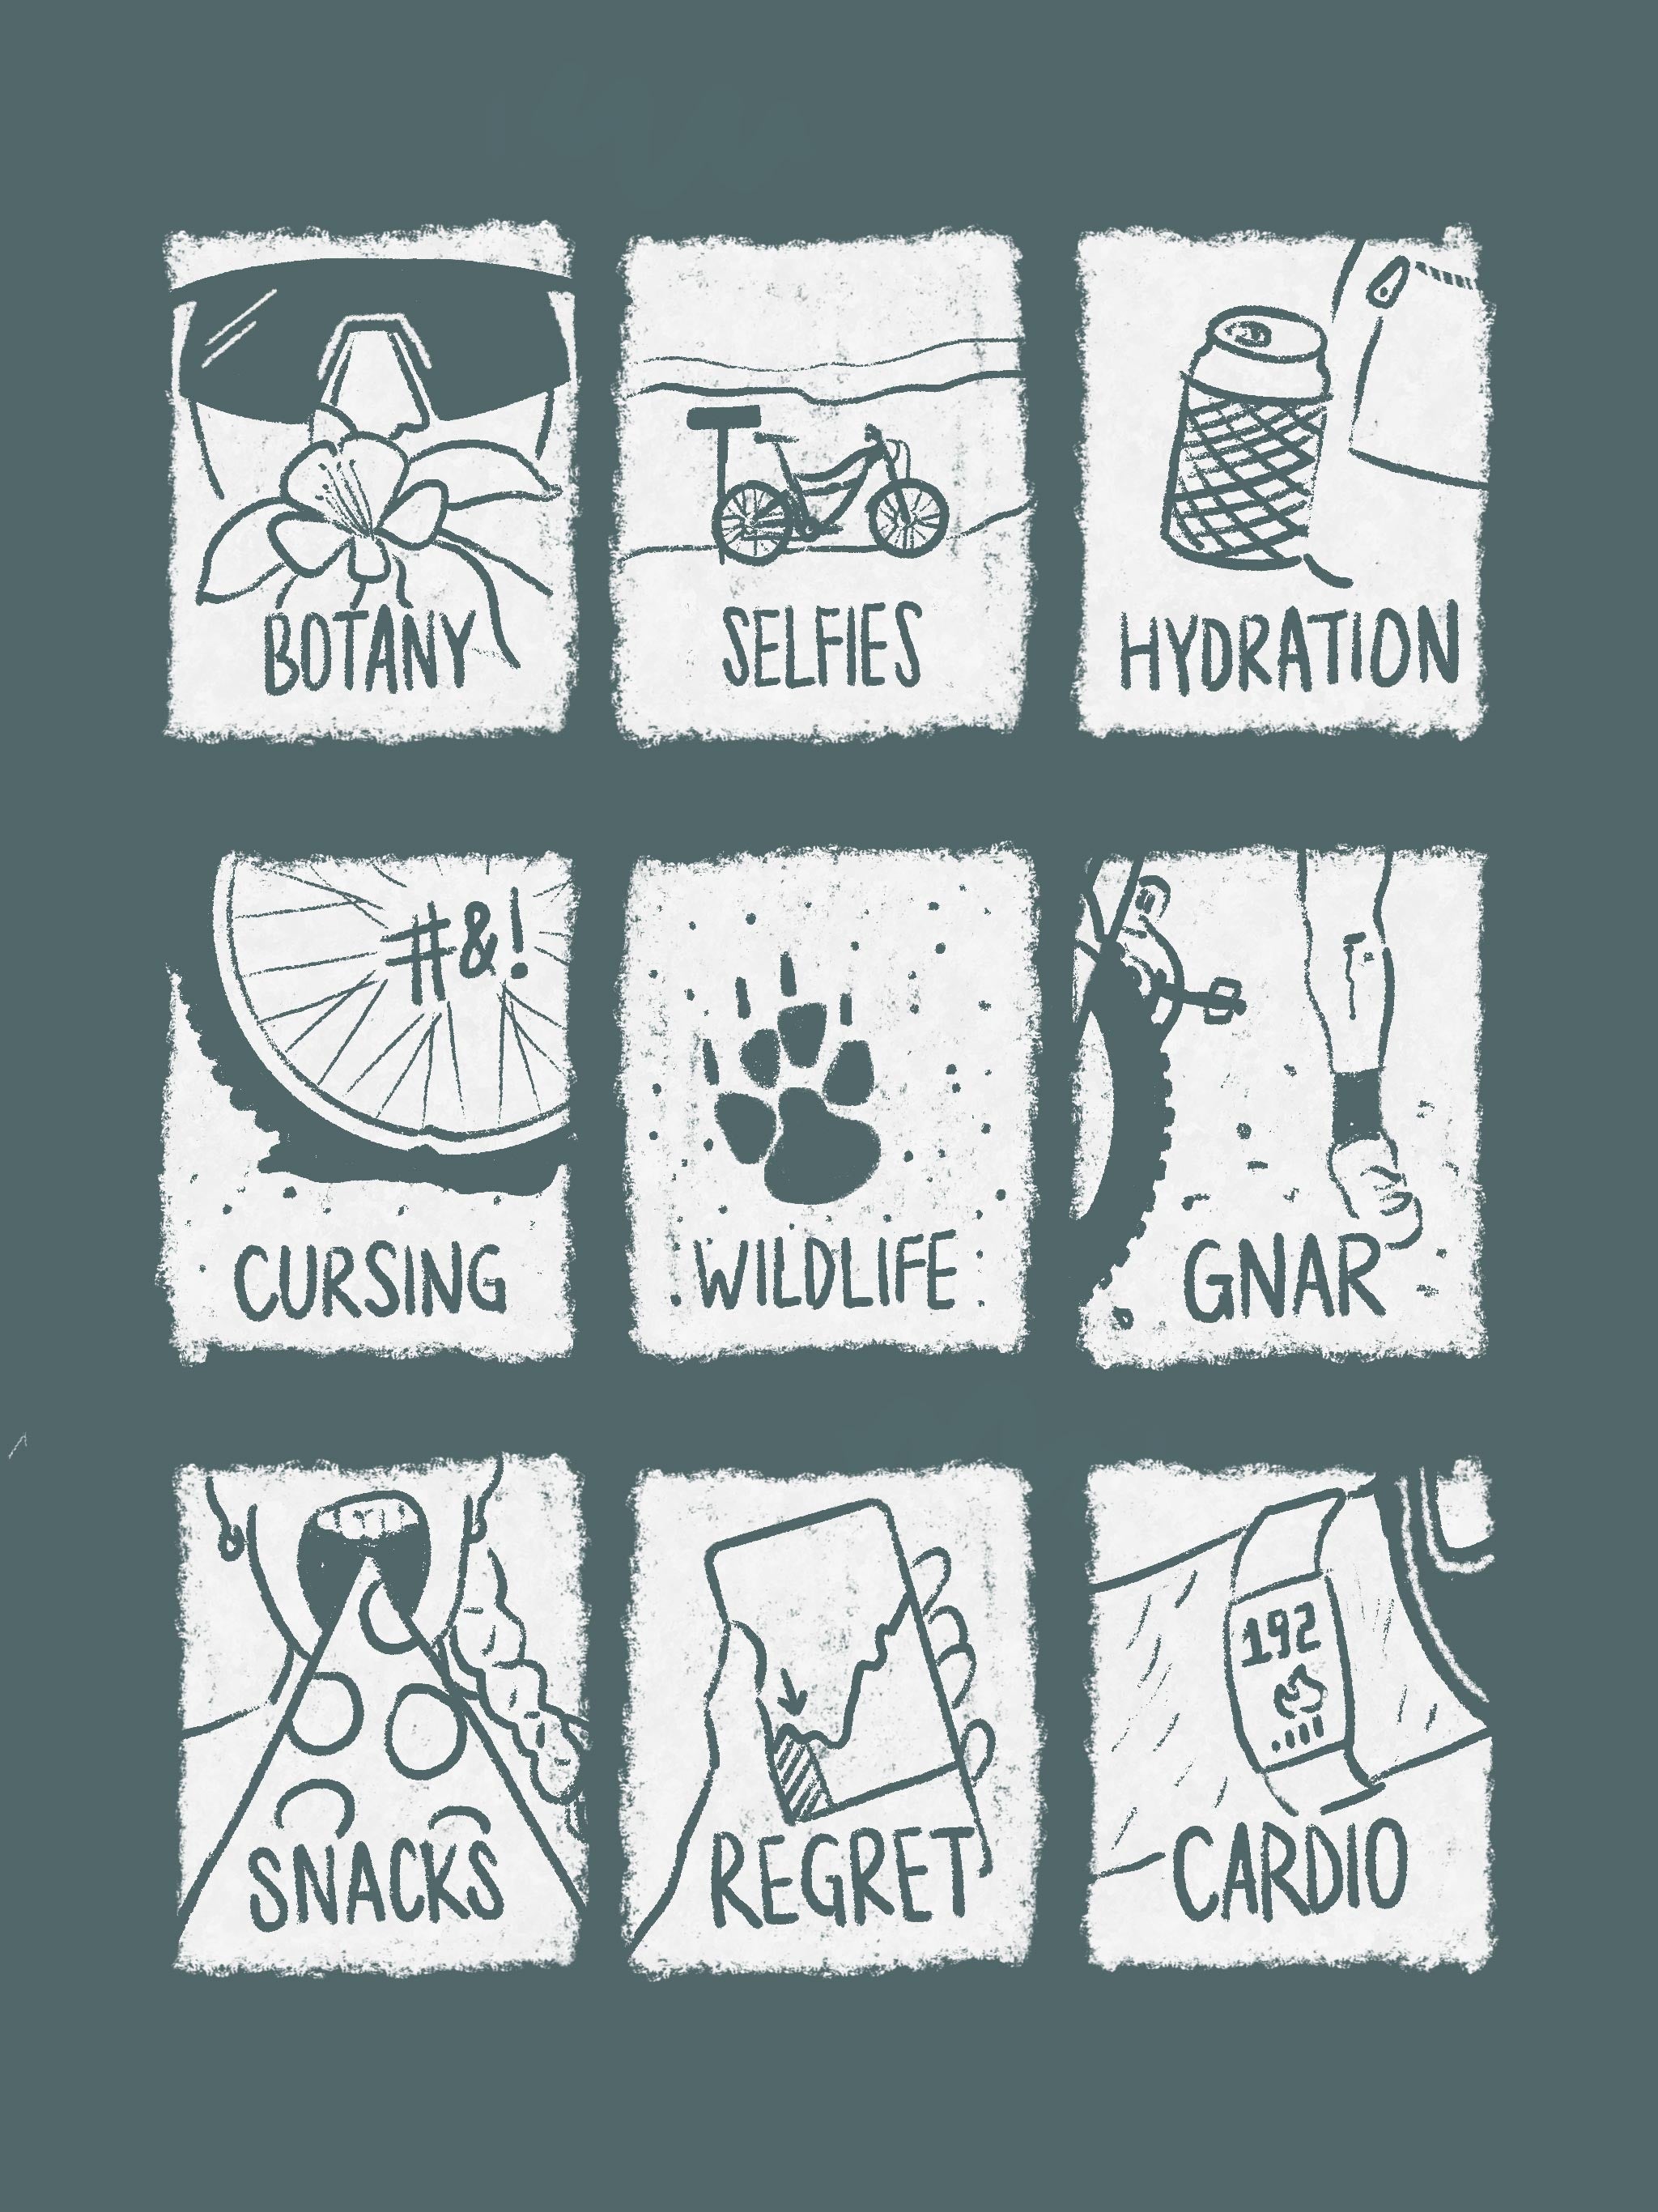 An illustration with a grid of 9 images showing the female mountain biking experience